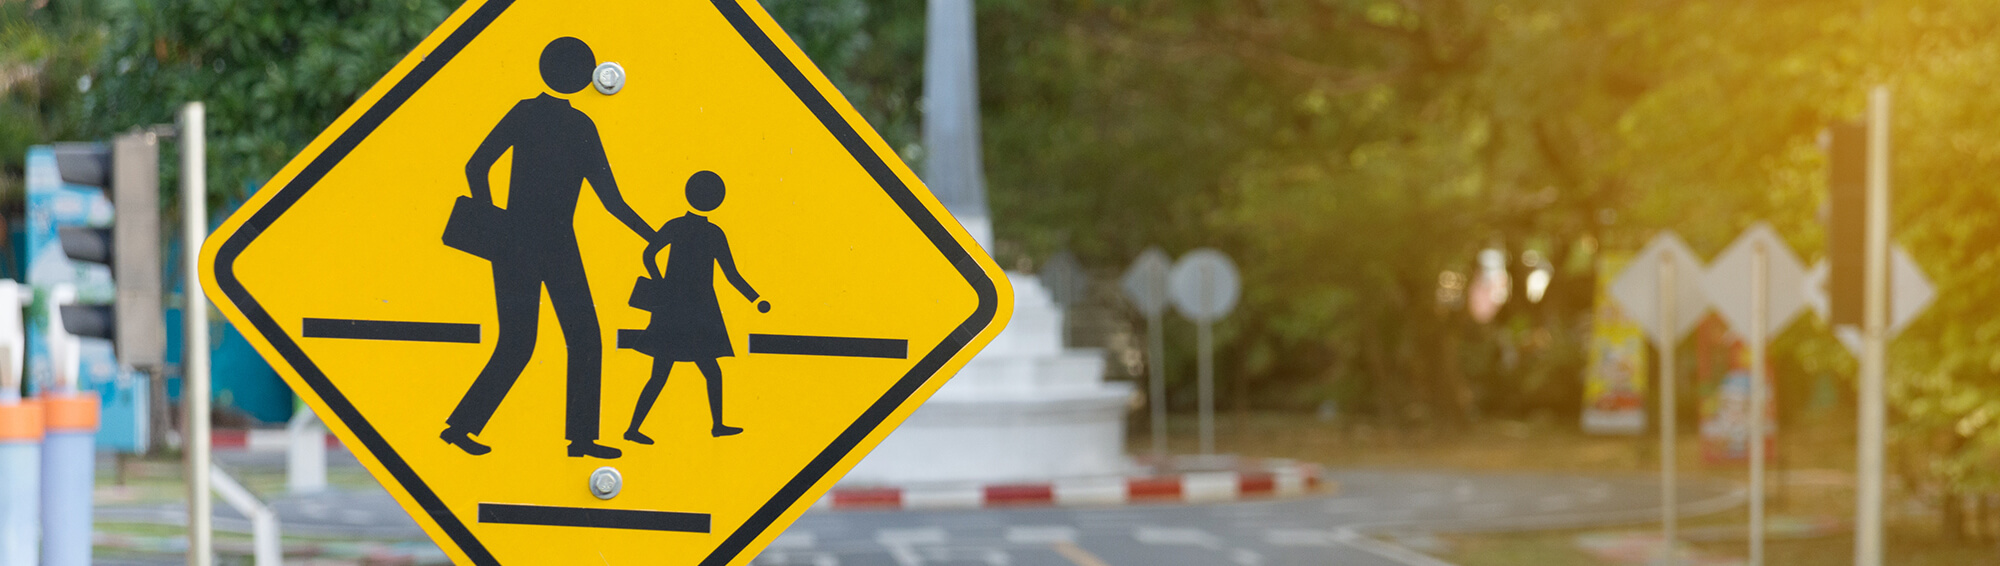 What Responsibilities Do Drivers Have to Avoid Hitting Pedestrians?